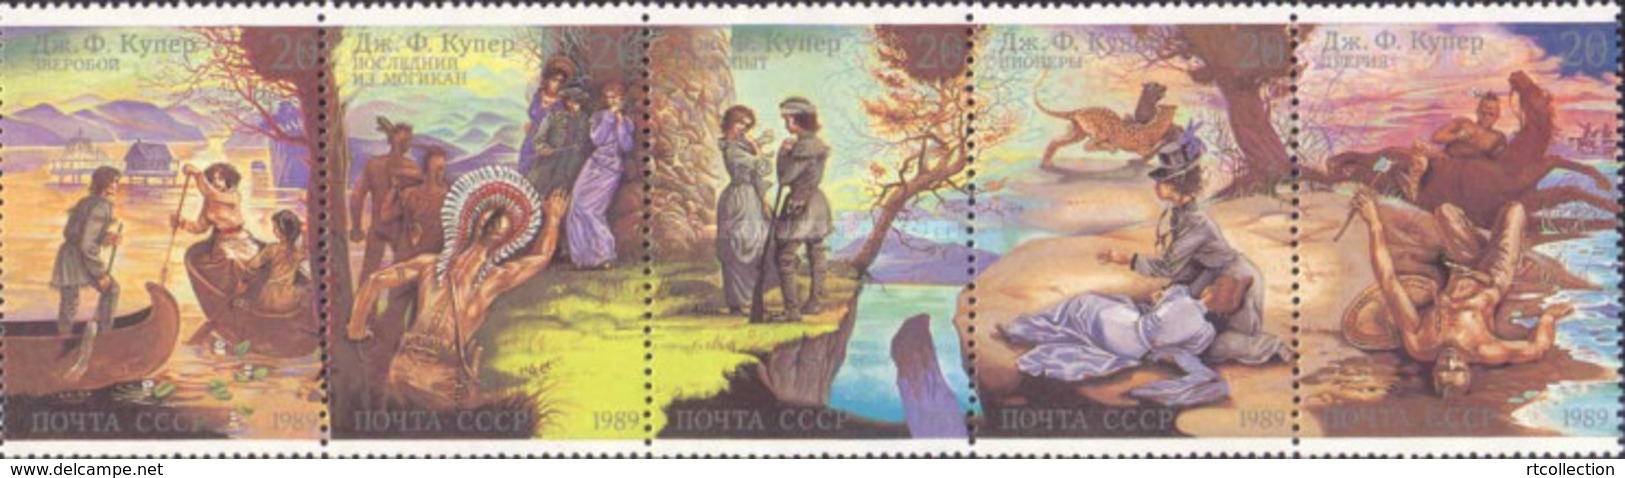 USSR Russia 1989 200th Birth Anniv J. F. Cooper Scenes Art Theater Writers Literature Authors Horses Hunter Stamps MNH - Horses